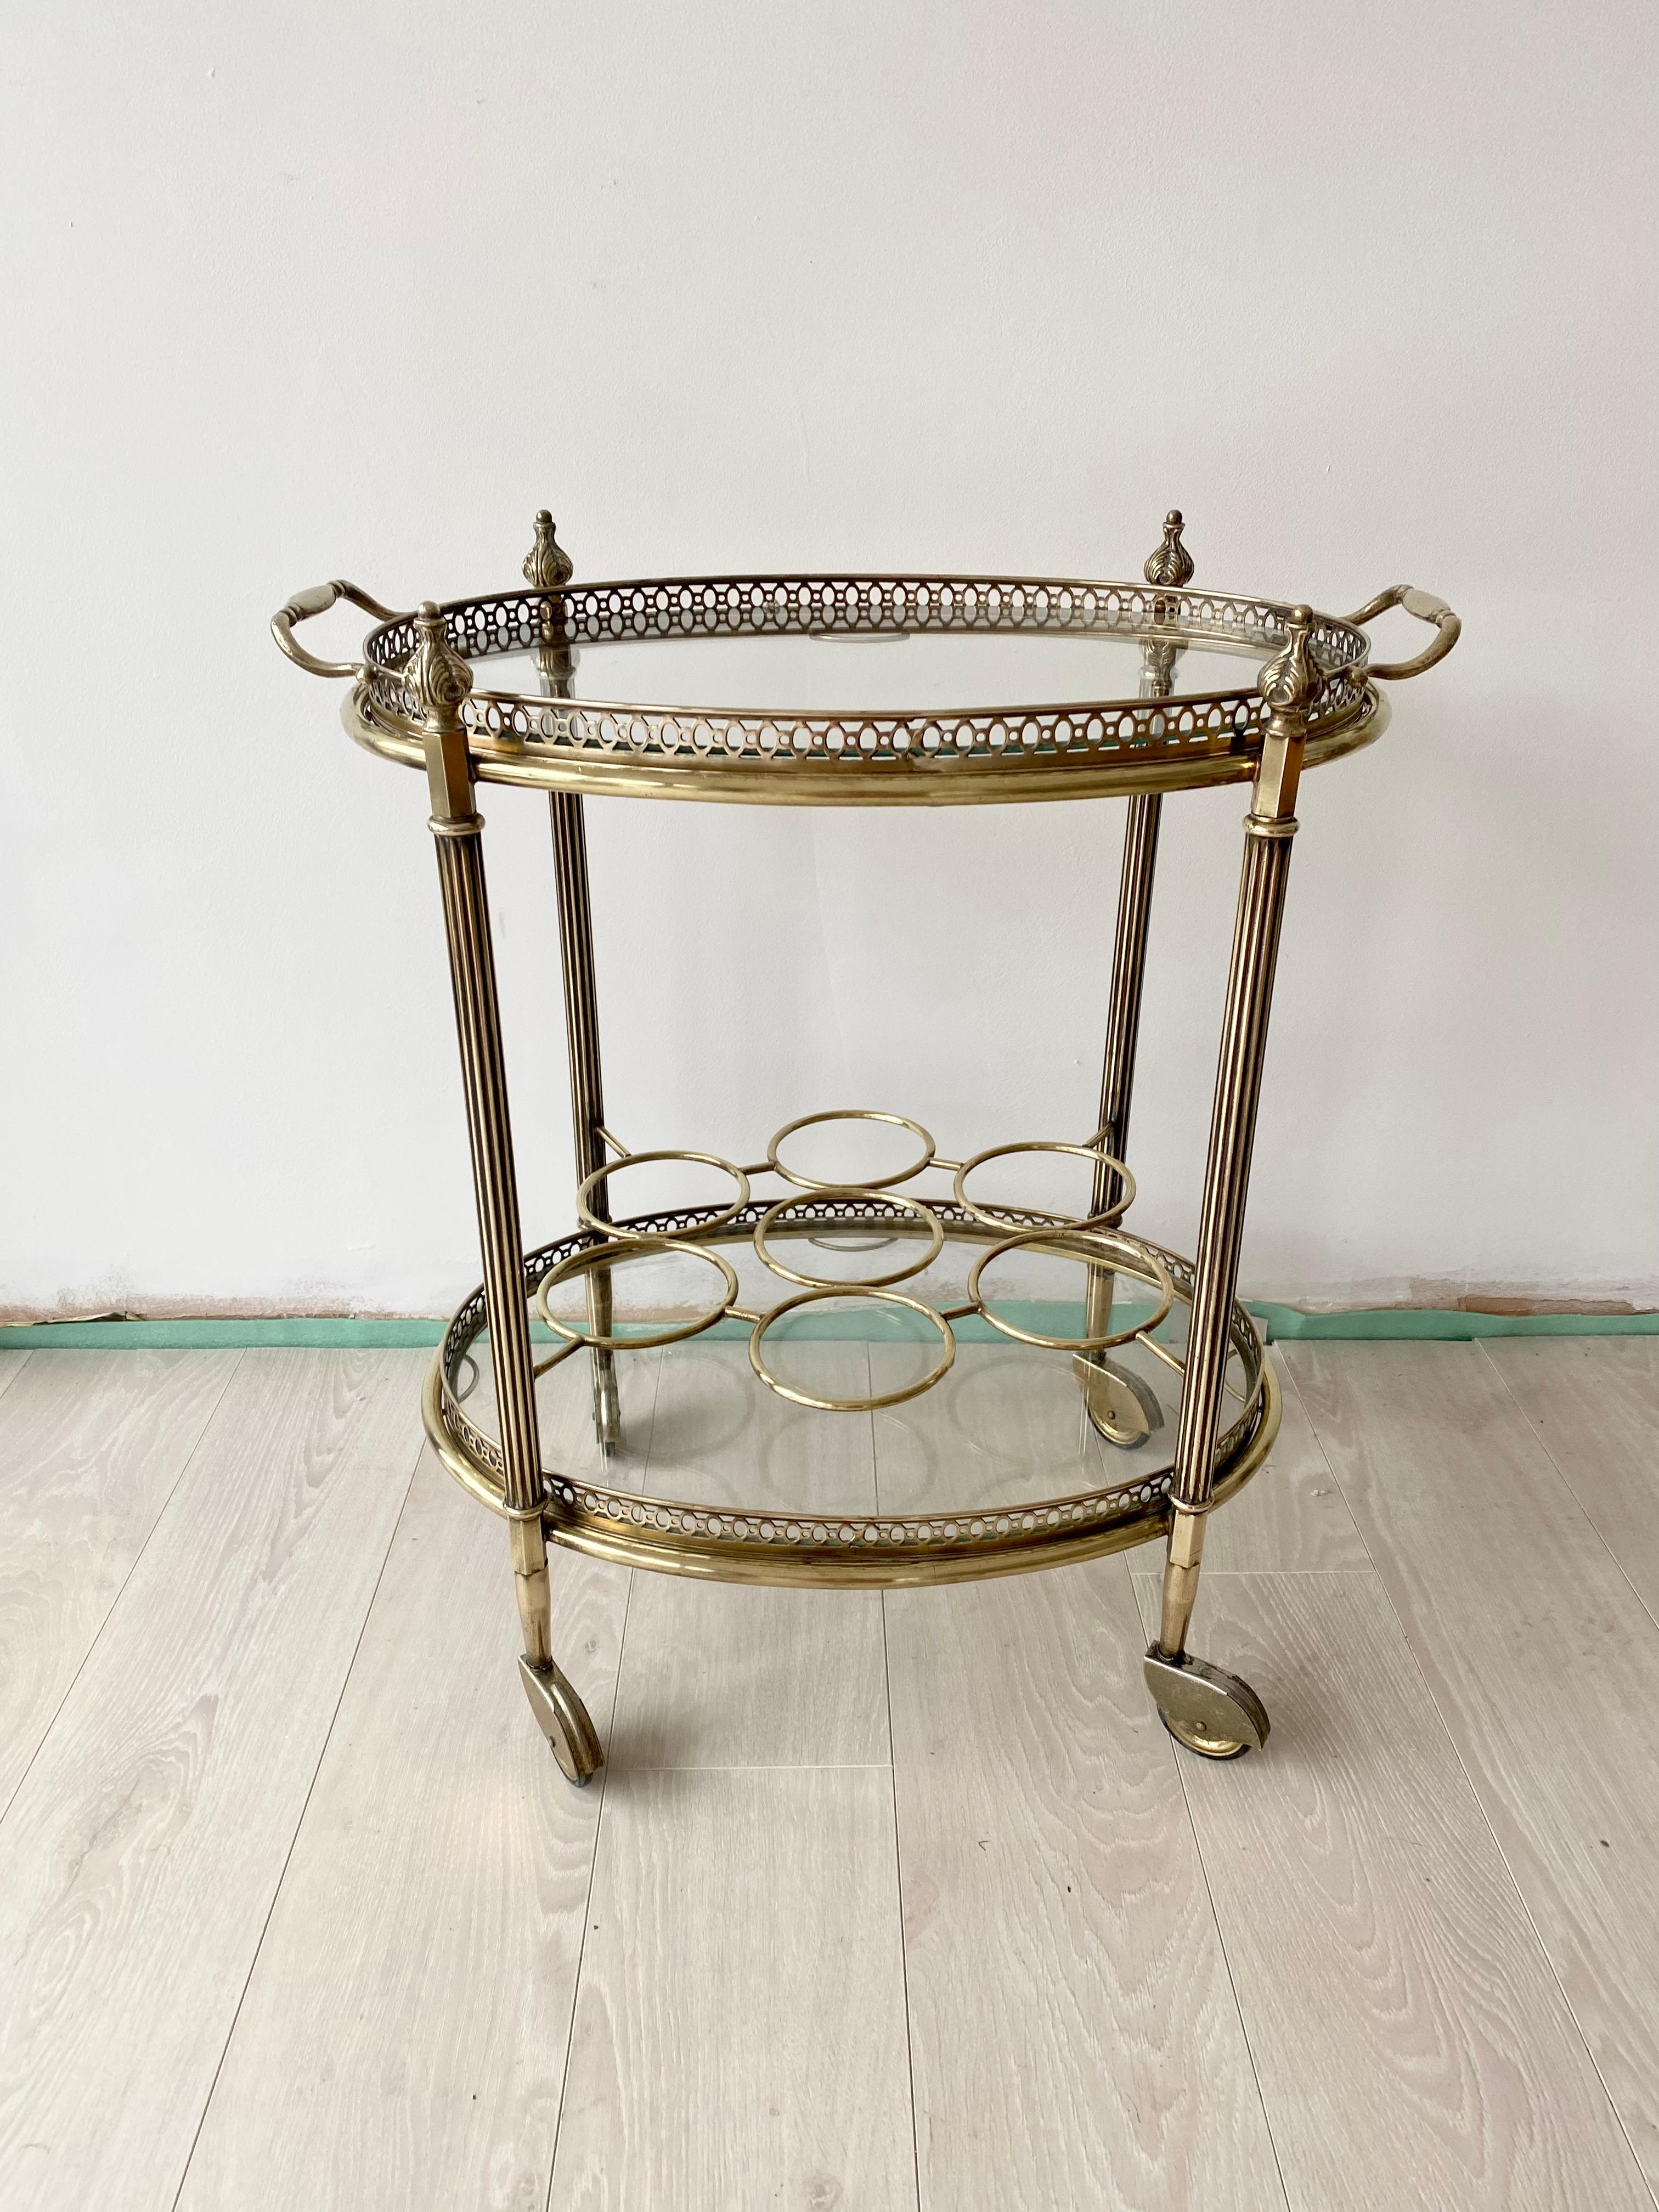 Perfect vintage brass cocktail trolley from France c1950

Lift off top tray and bottle holder to lower tier

Polished brass frame measuring 56cm wide, 36cm deep and 62cm to finials.